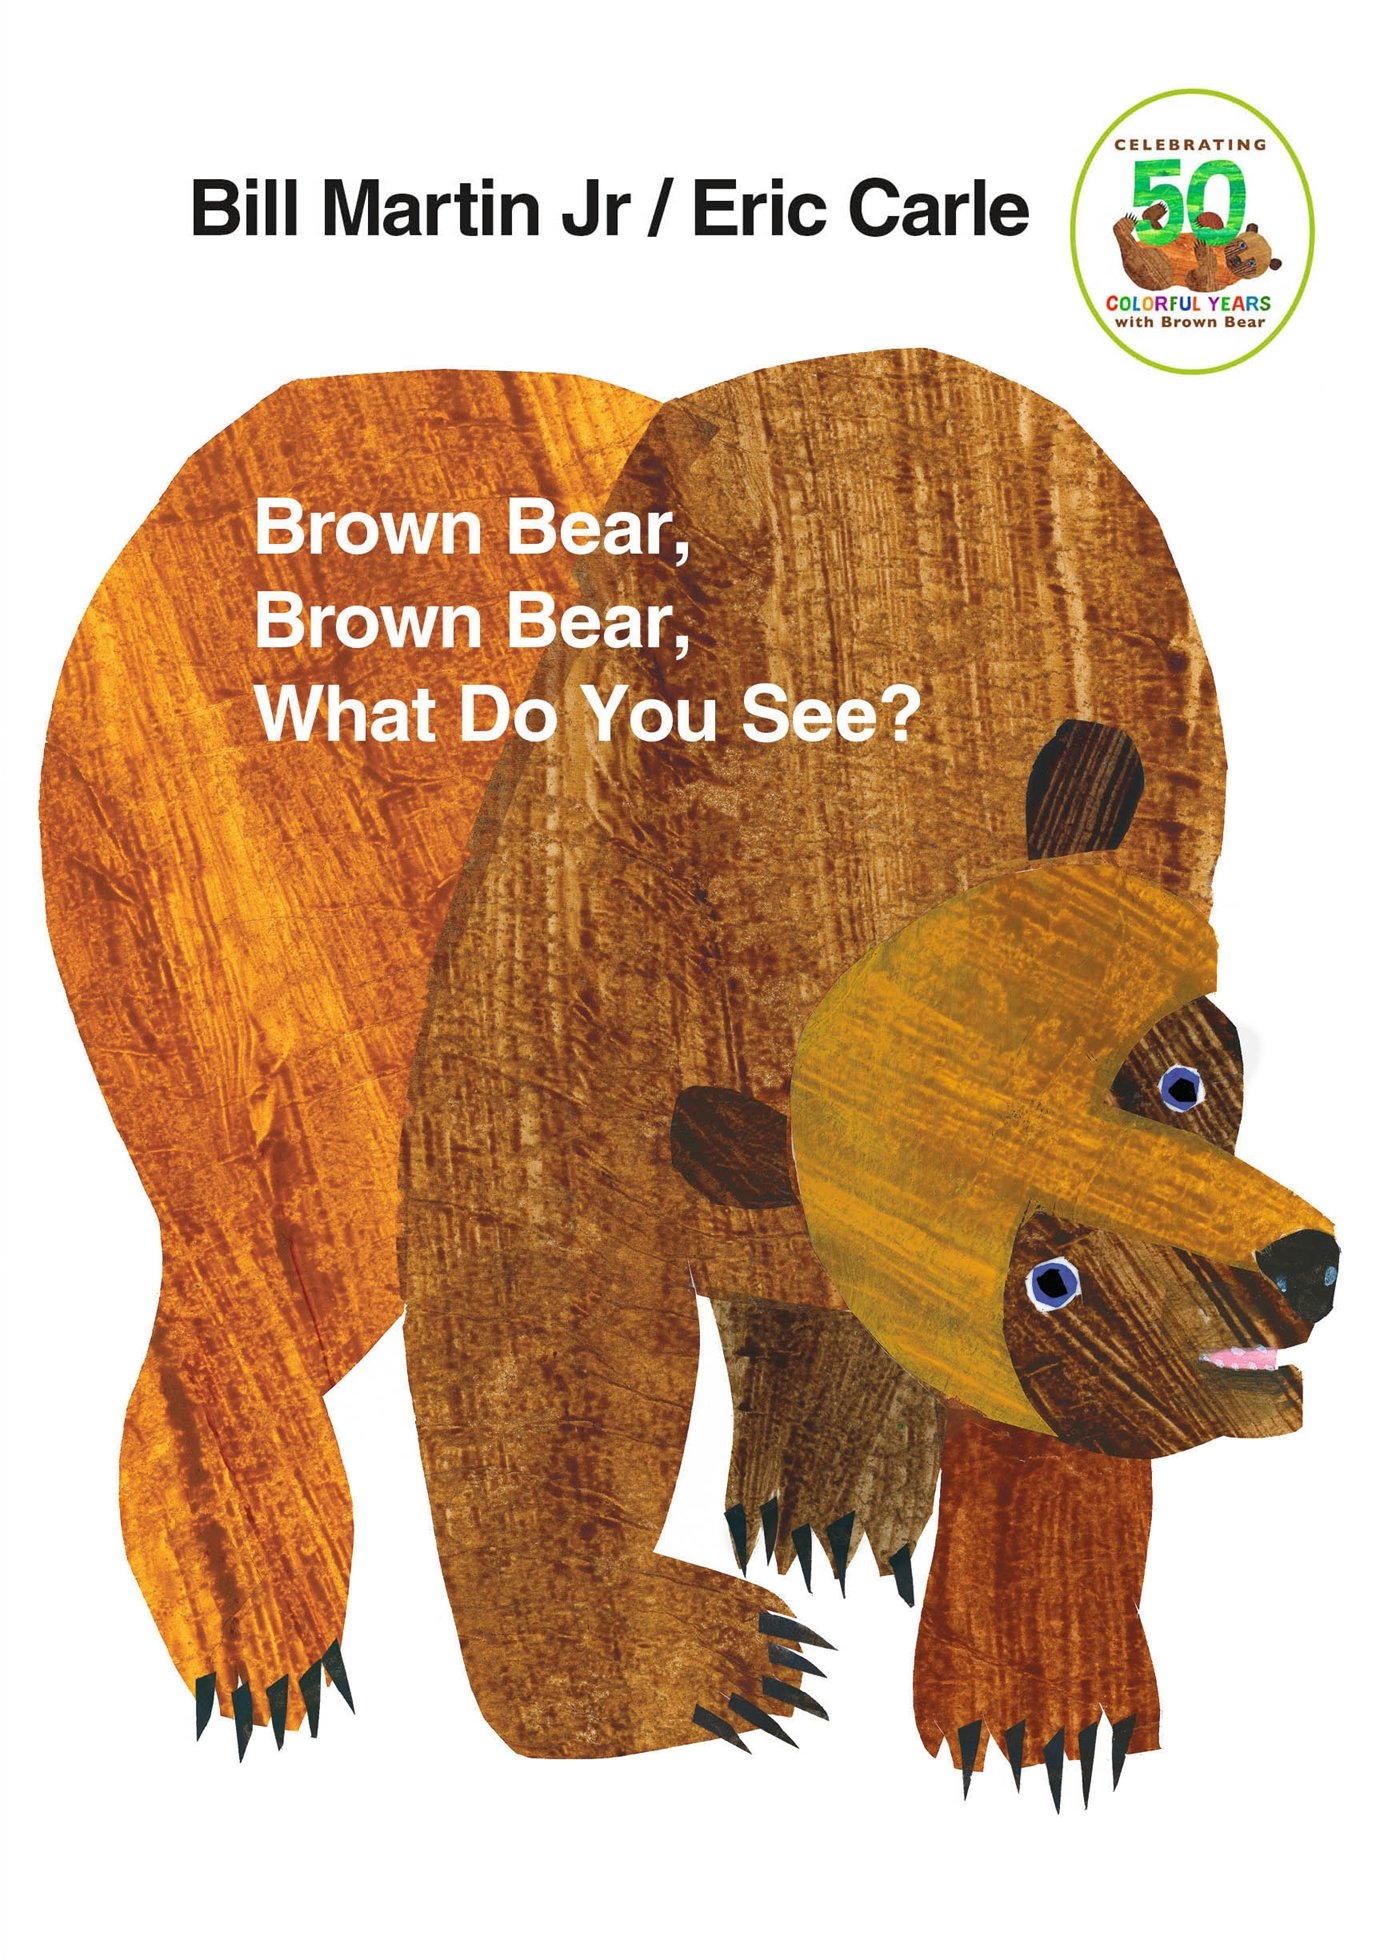 Amazon.com: Brown Bear, Brown Bear, What Do You See? (0000805047903 ...